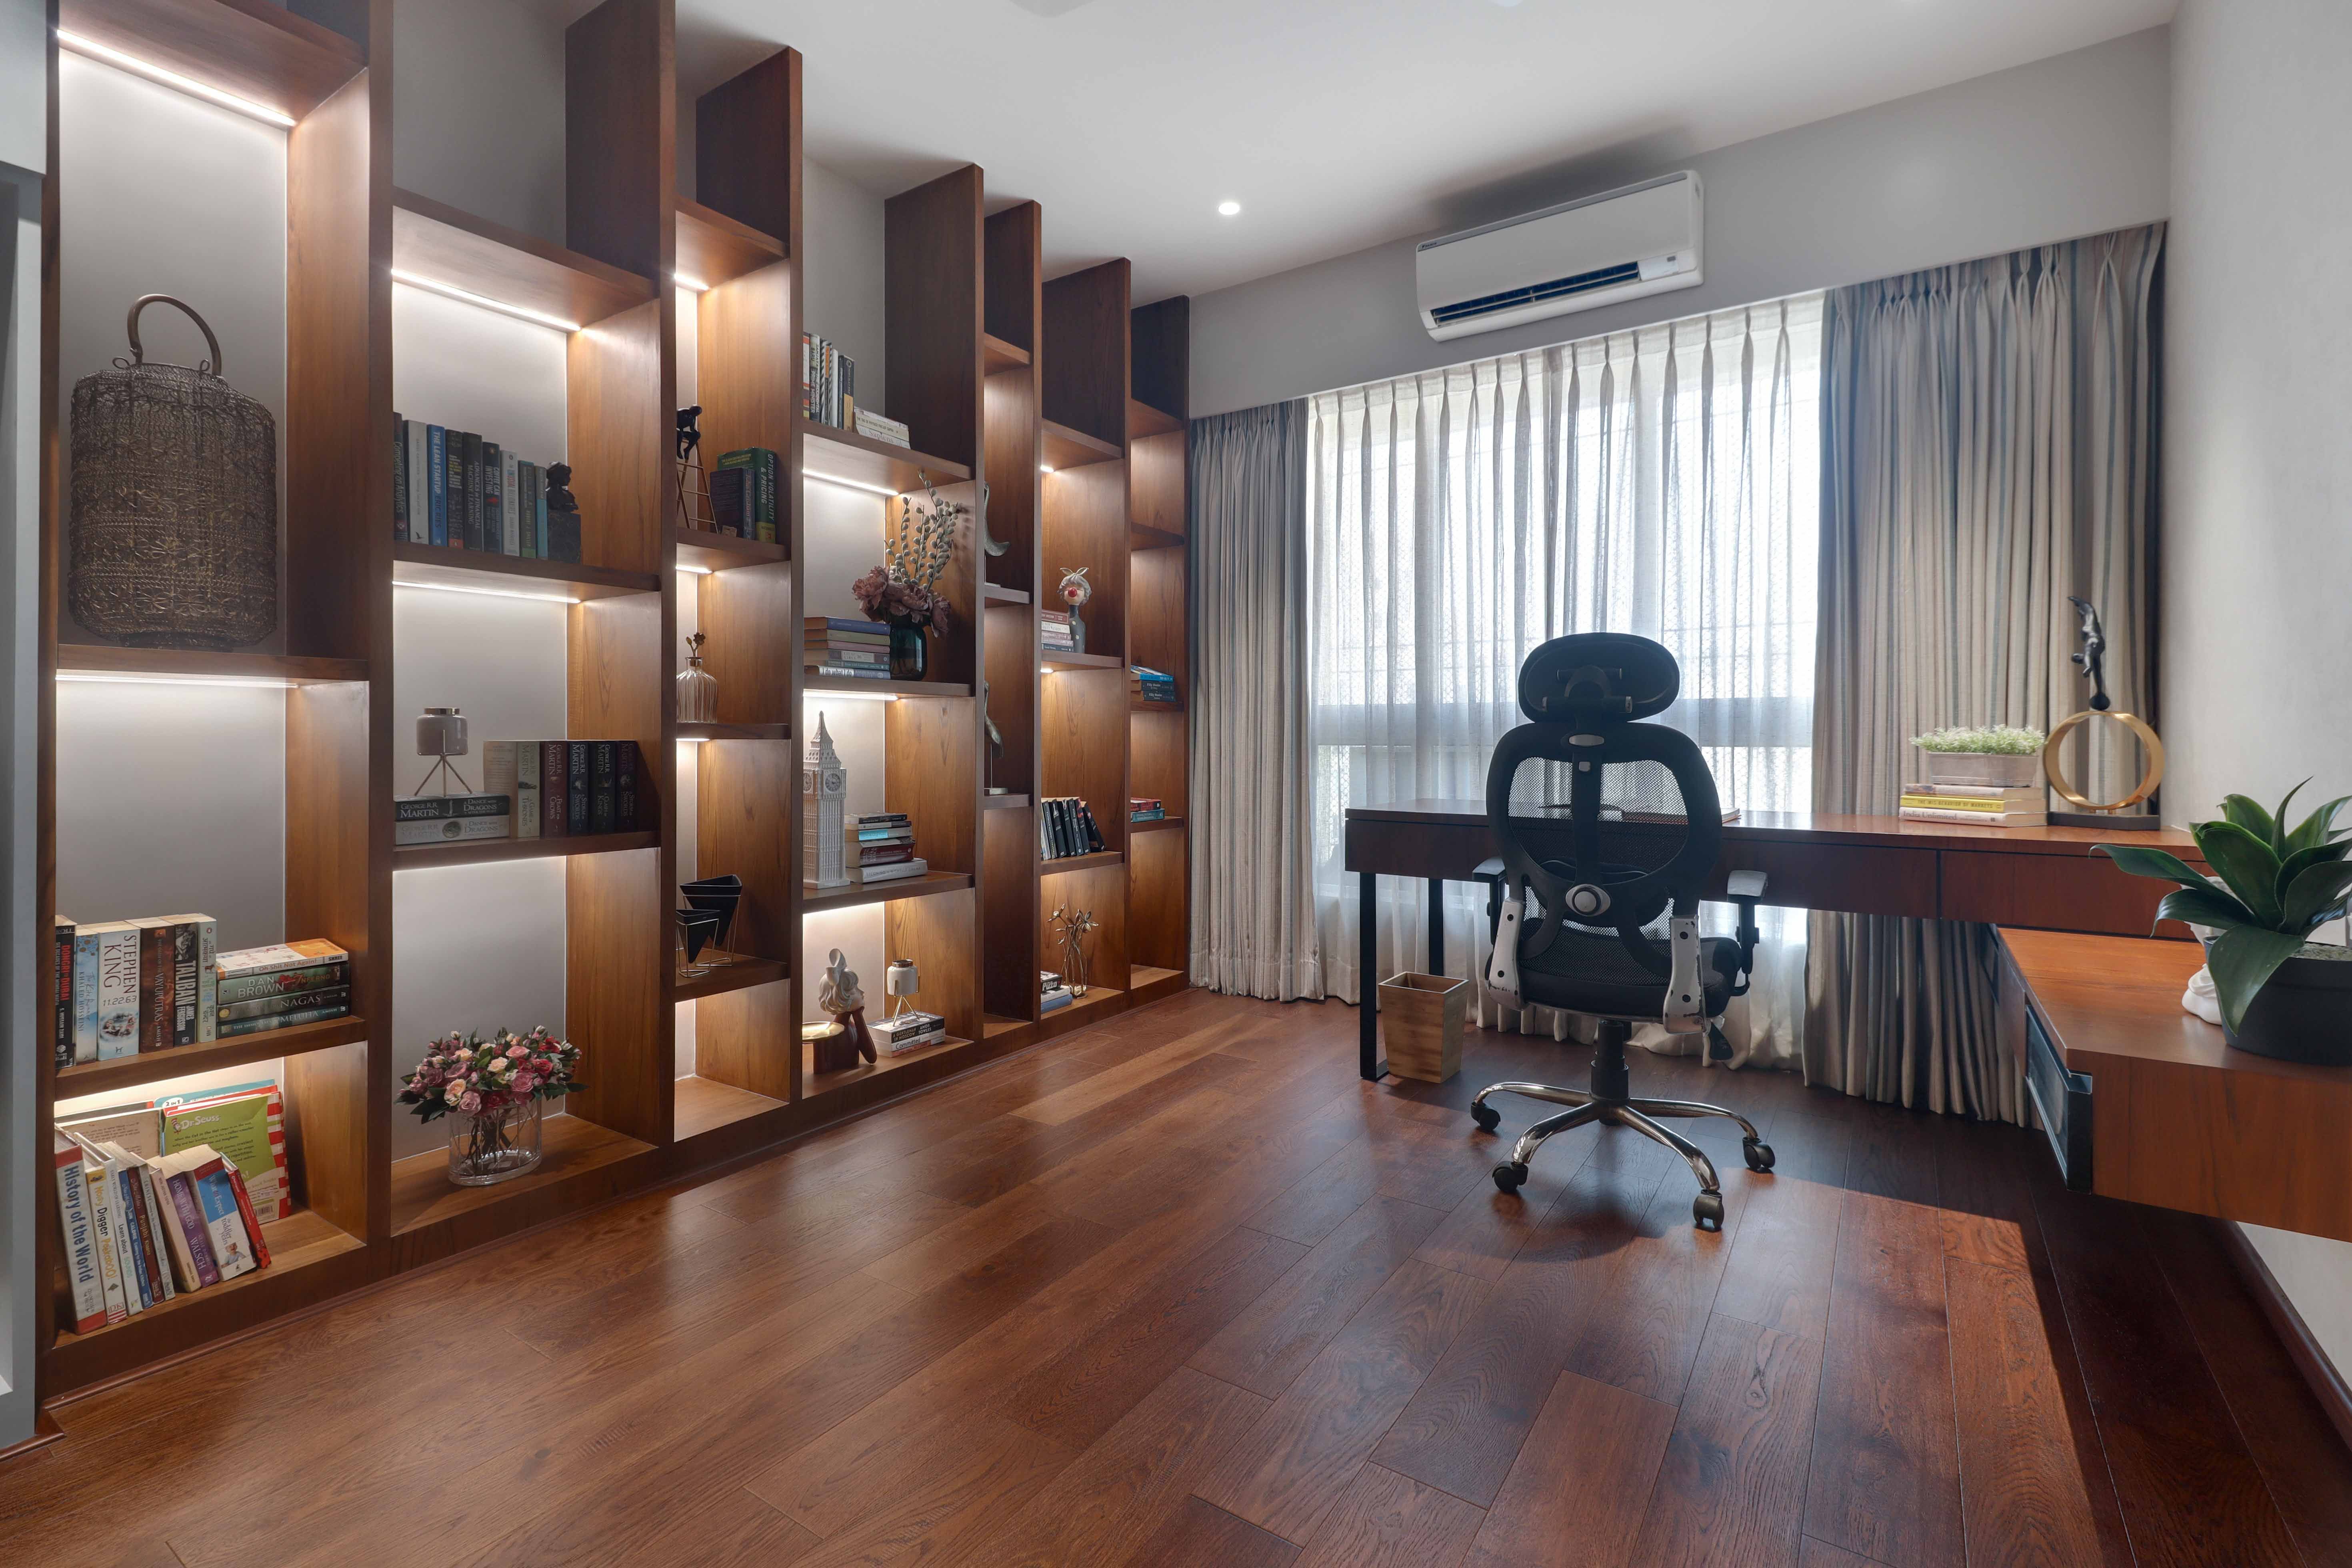 Modern Home Office Design With A Wide L-Shaped Study Table